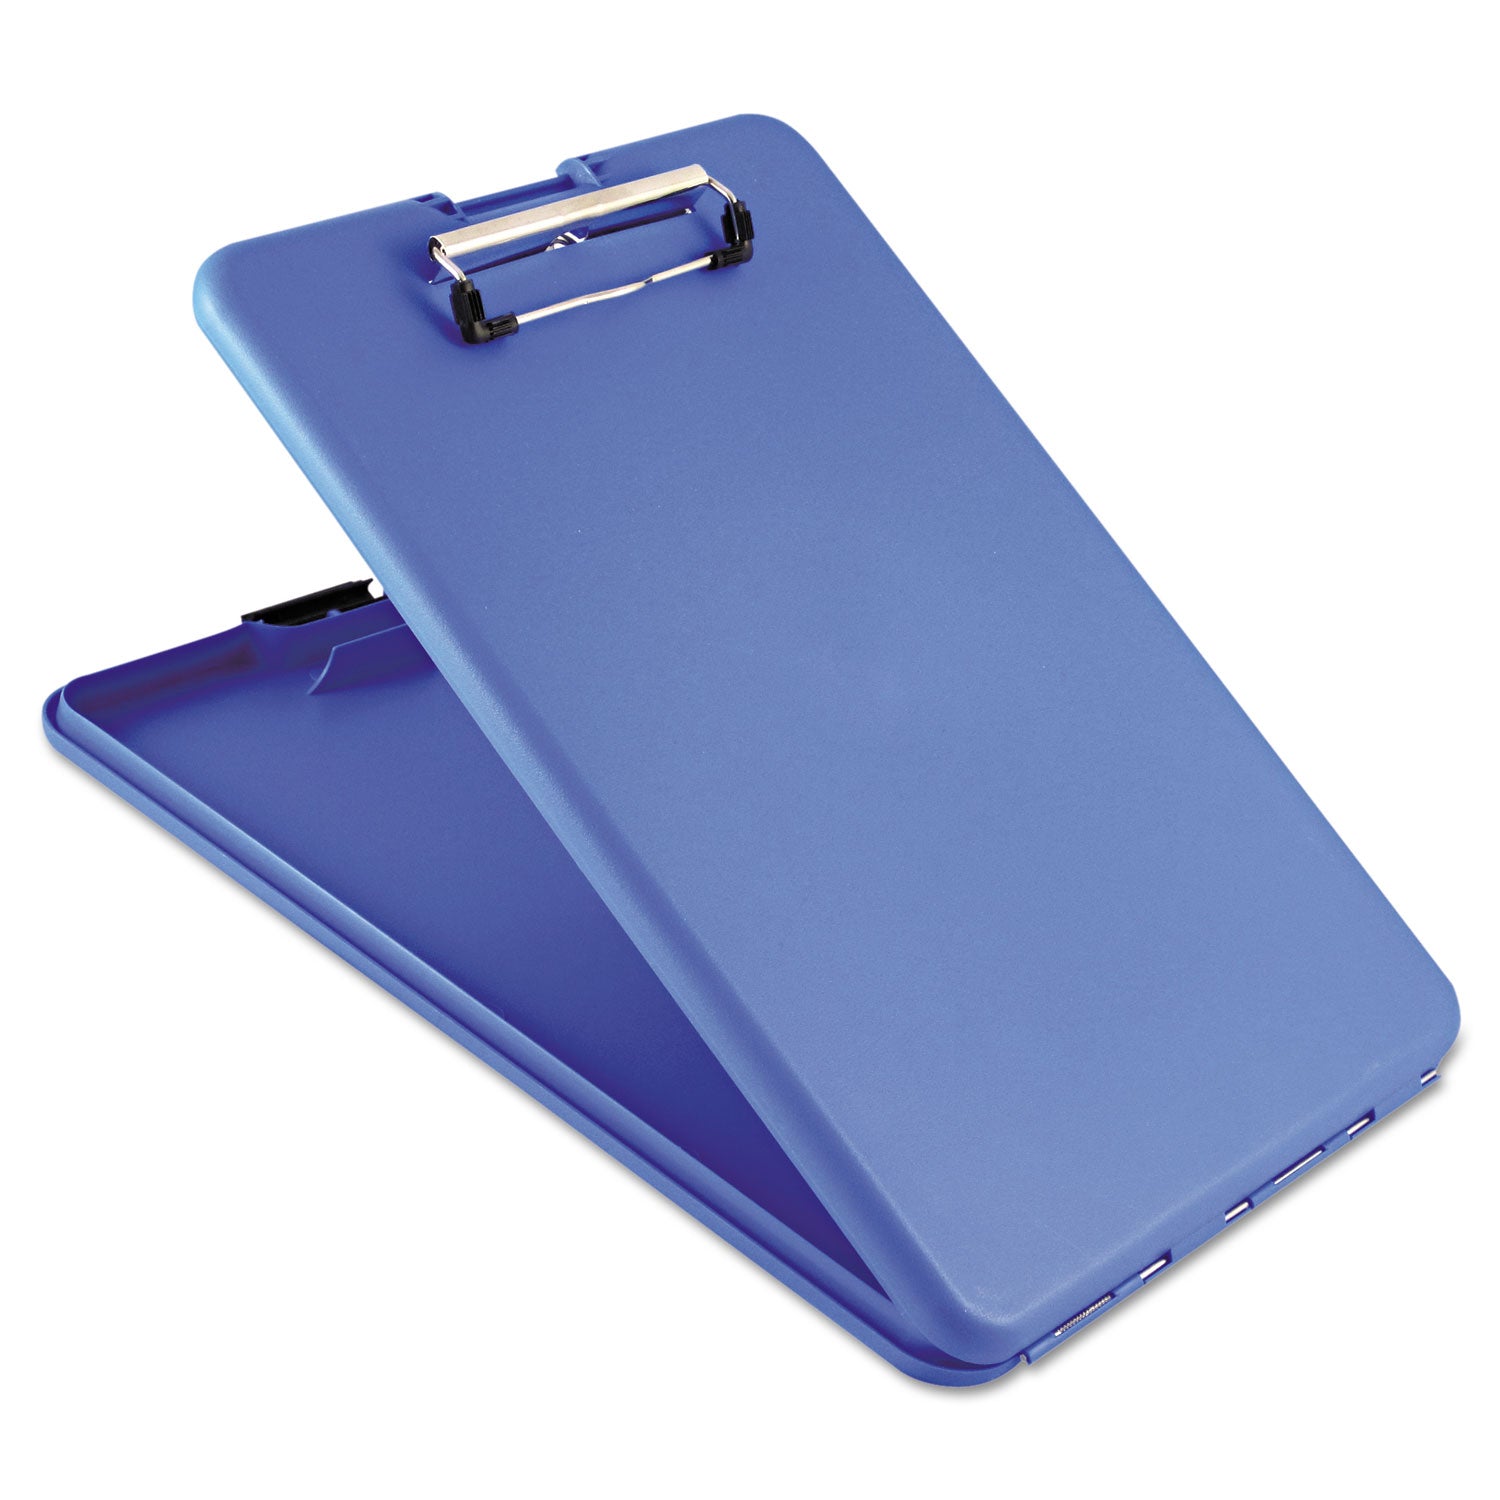 SlimMate Storage Clipboard, 0.5" Clip Capacity, Holds 8.5 x 11 Sheets, Blue - 